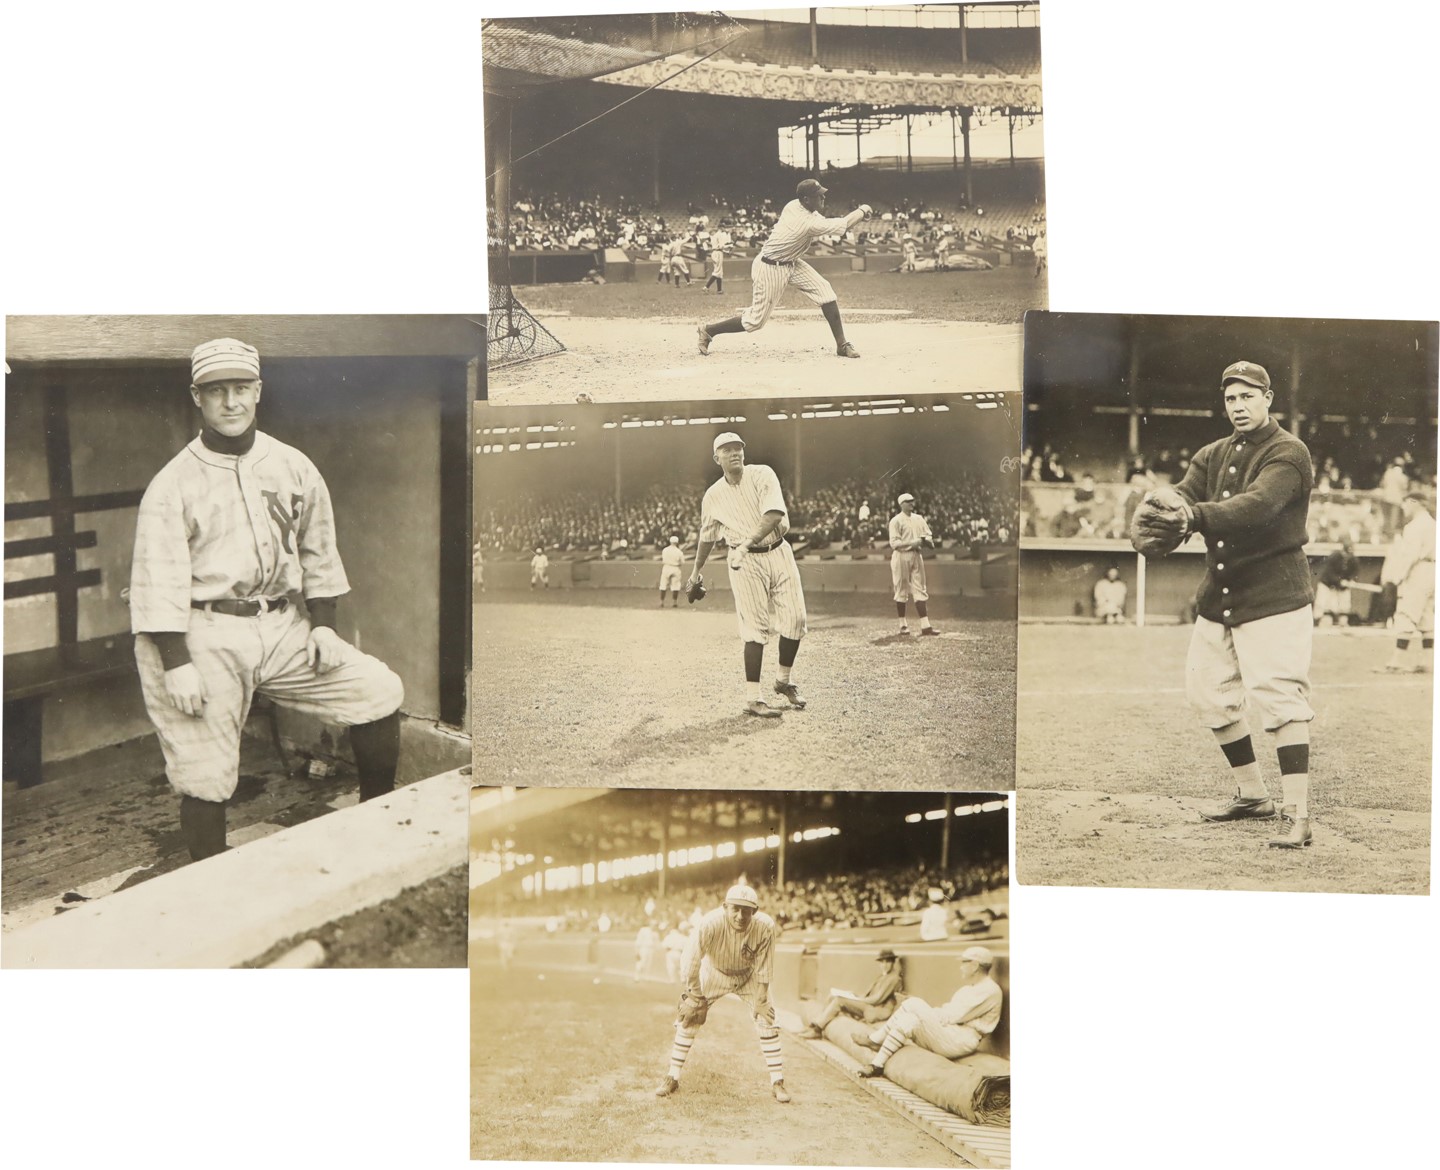 The Brown Brothers Photograph Collection - Vintage Baseball Photograph Collection (18)